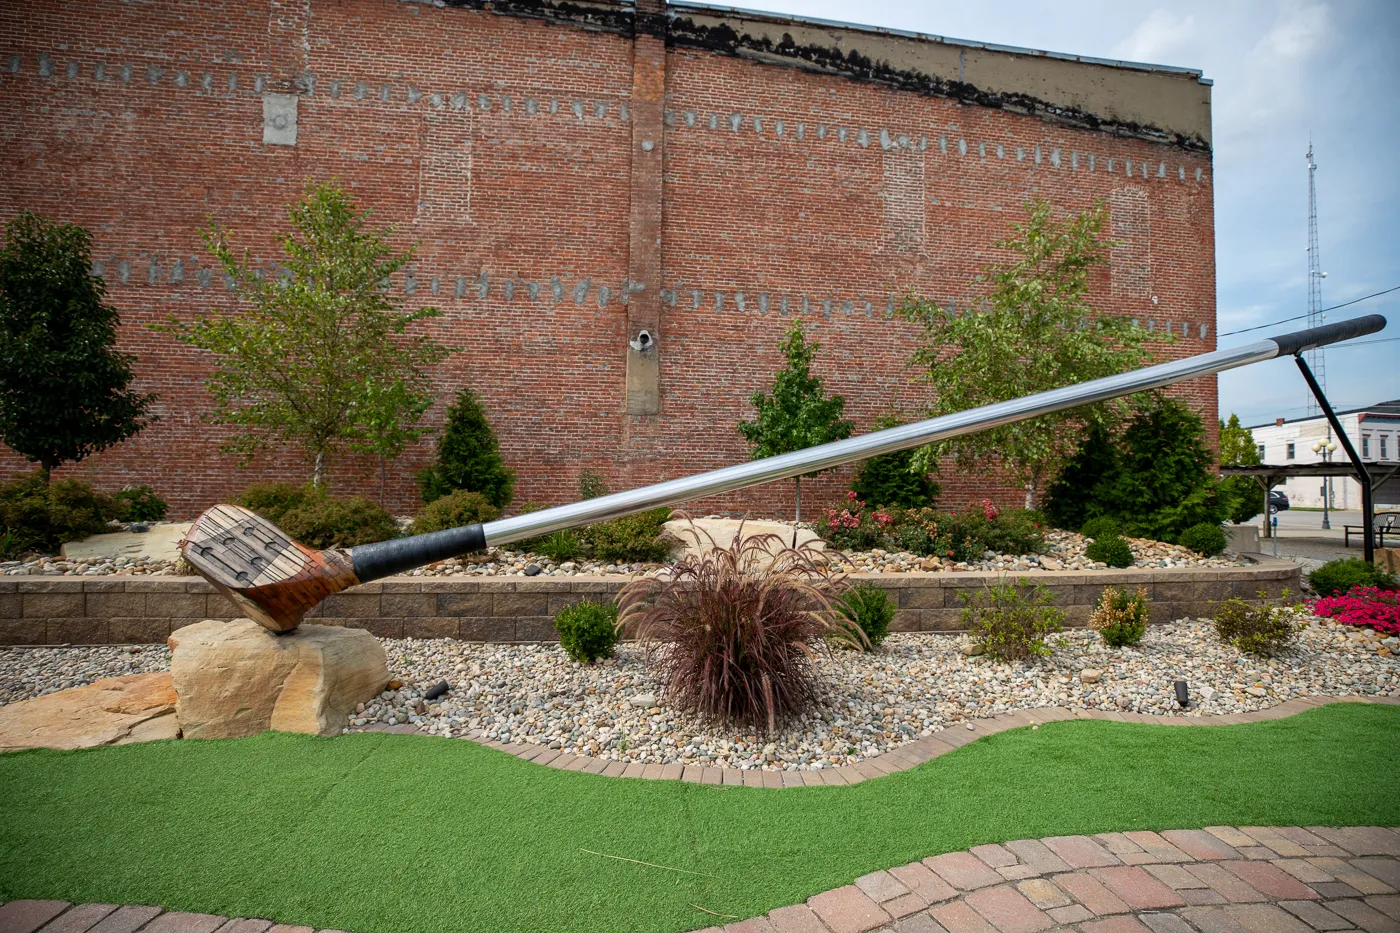 World's Largest Golf Club in Casey, Illinois roadside attraction